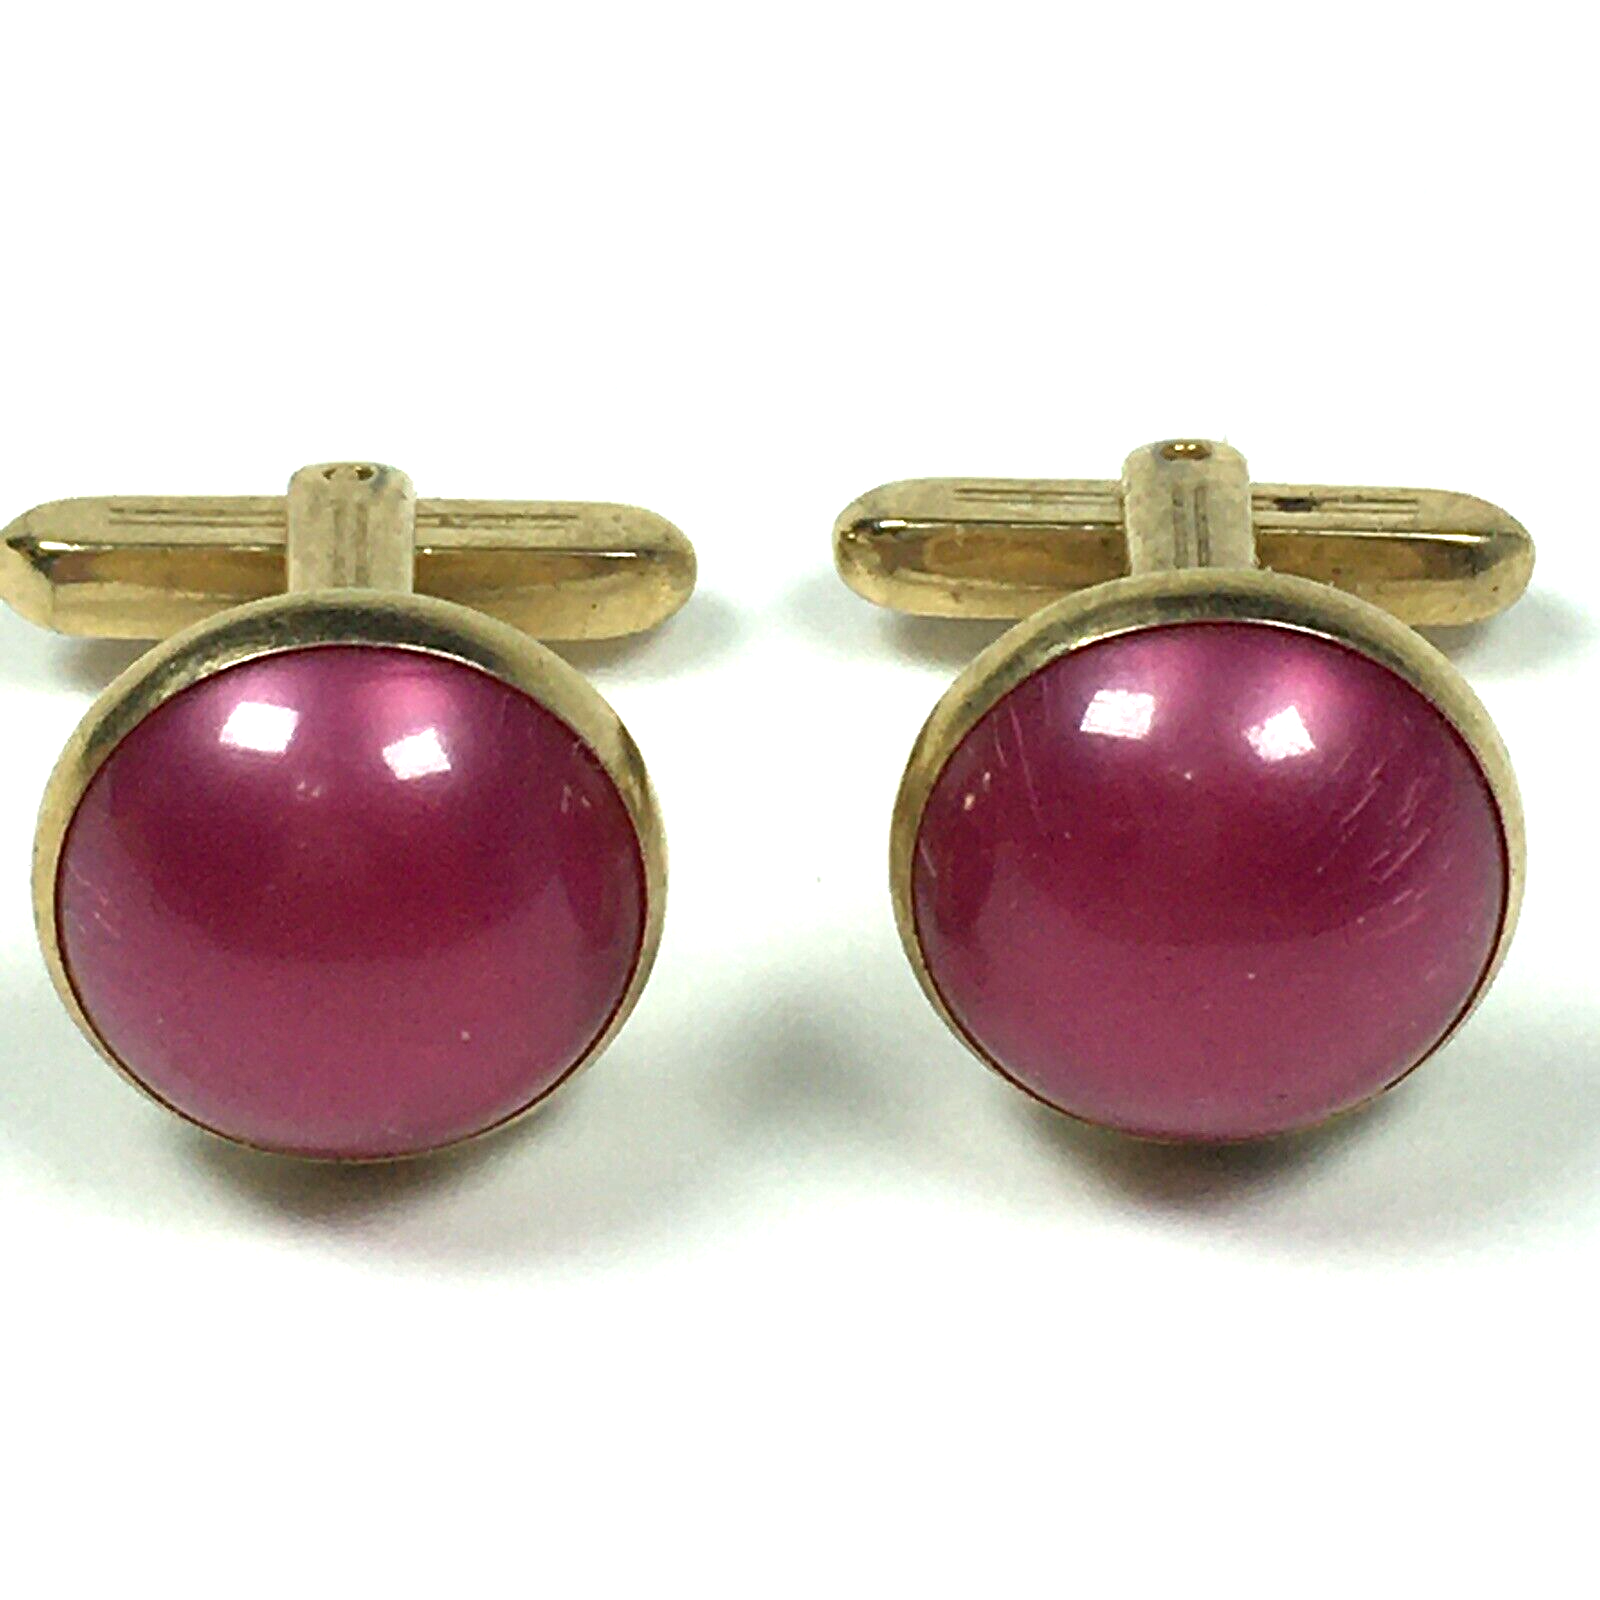 Hickok Pink Moonglow Cabochon Cufflinks Vintage Gold Tone Cuff Links - $24.00